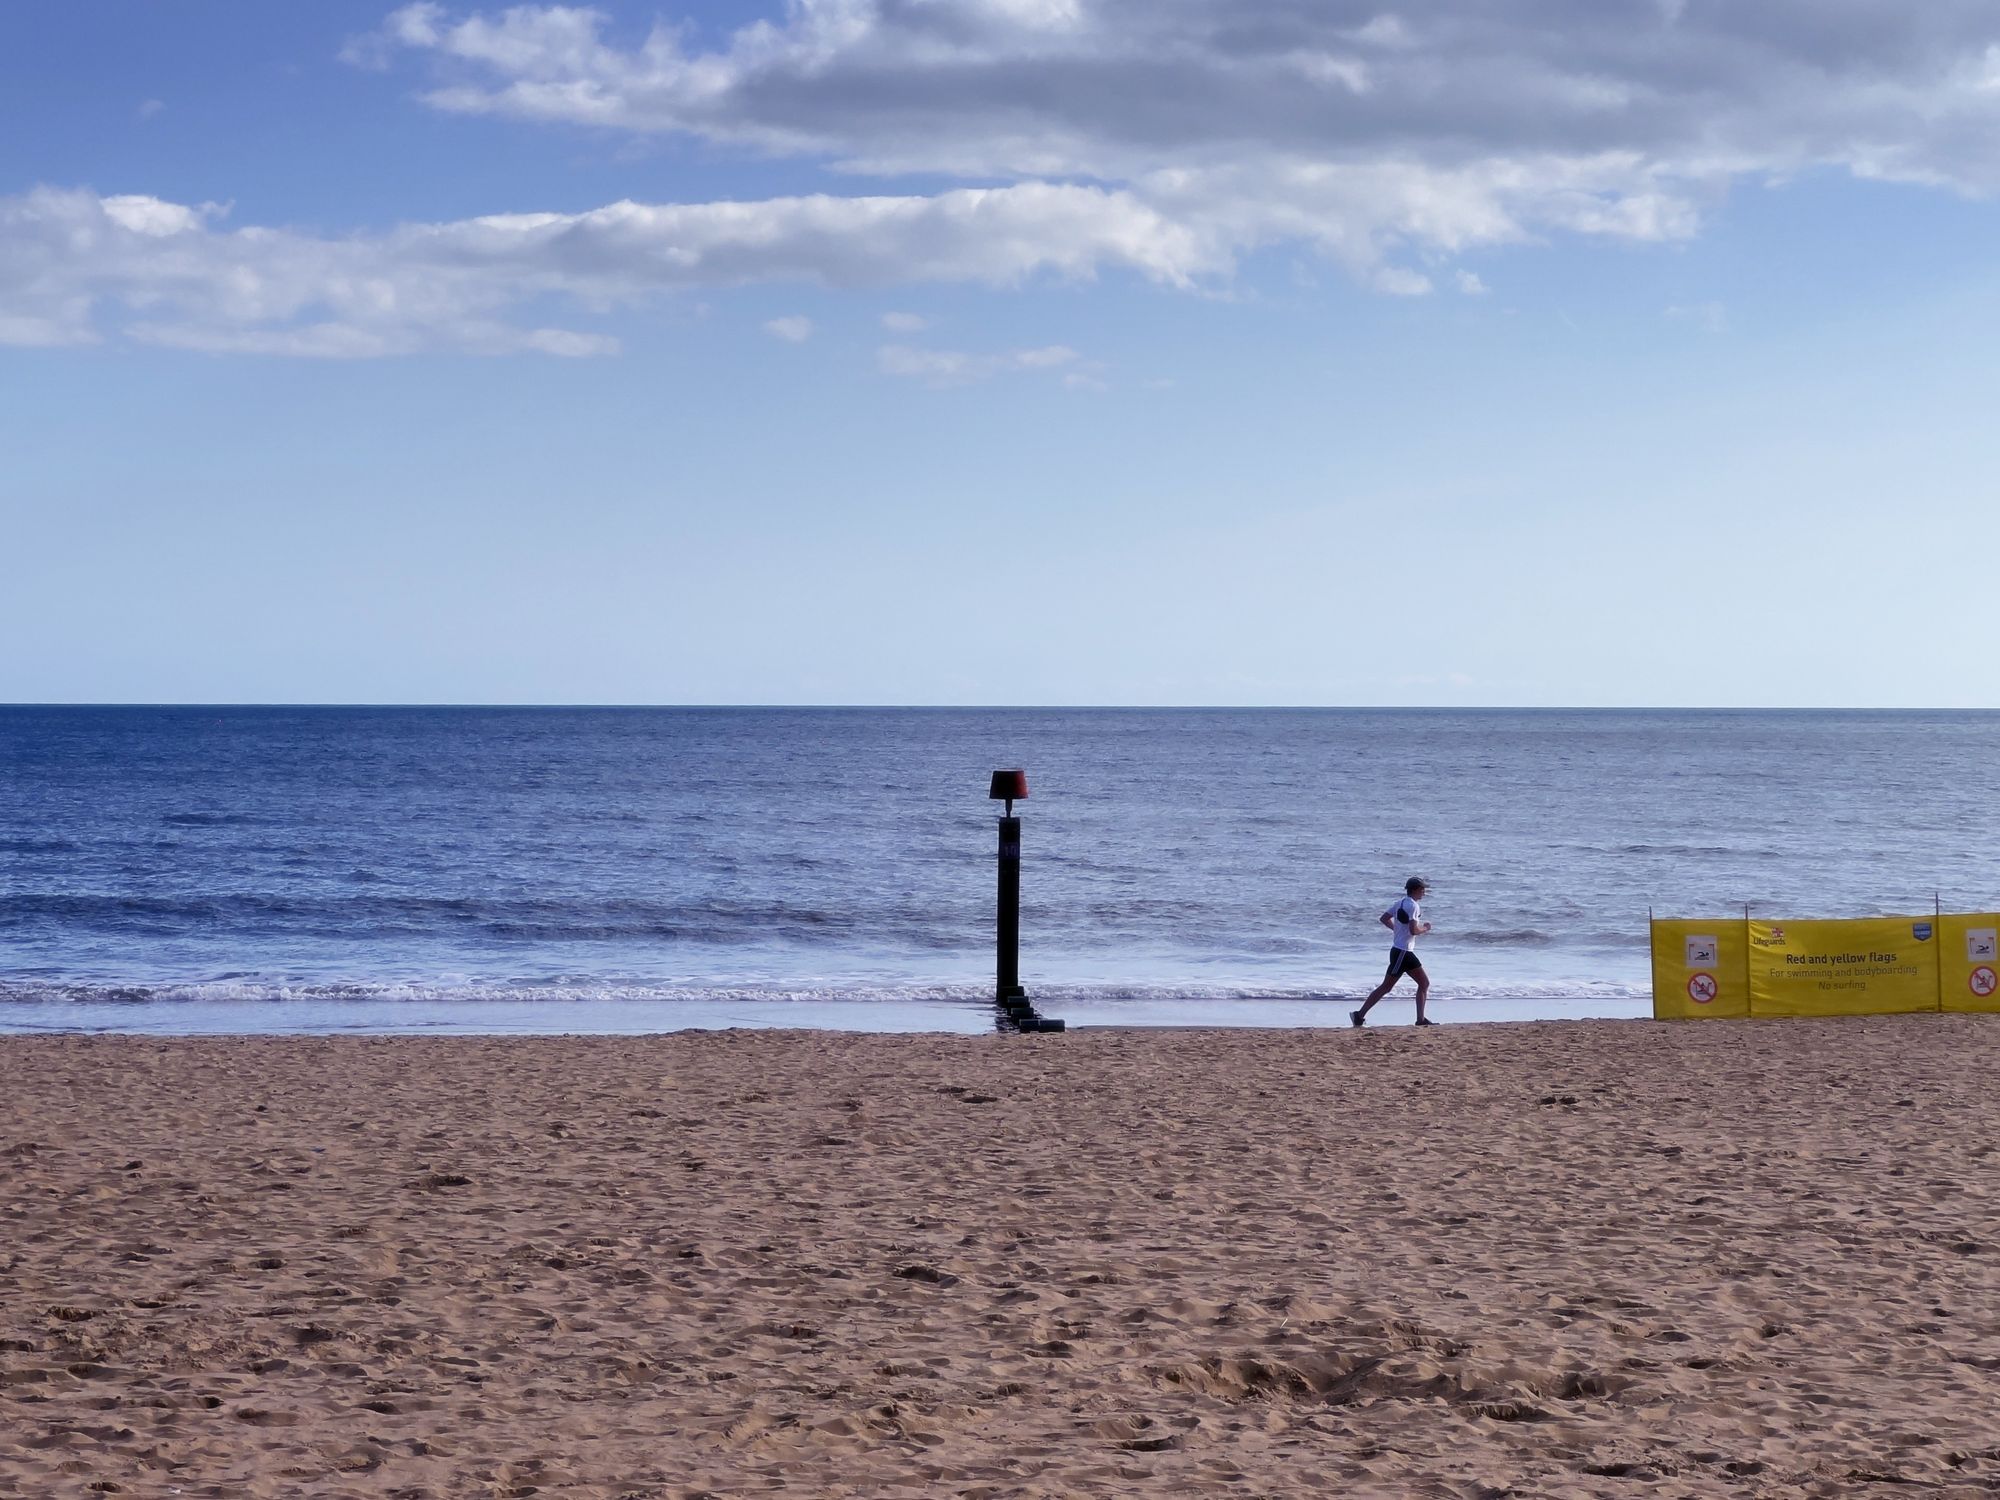 A runner runs past a beach marker on a sunny day, looking out to sea. A yellow fabric barrier carries a warning about red and yellow flags.